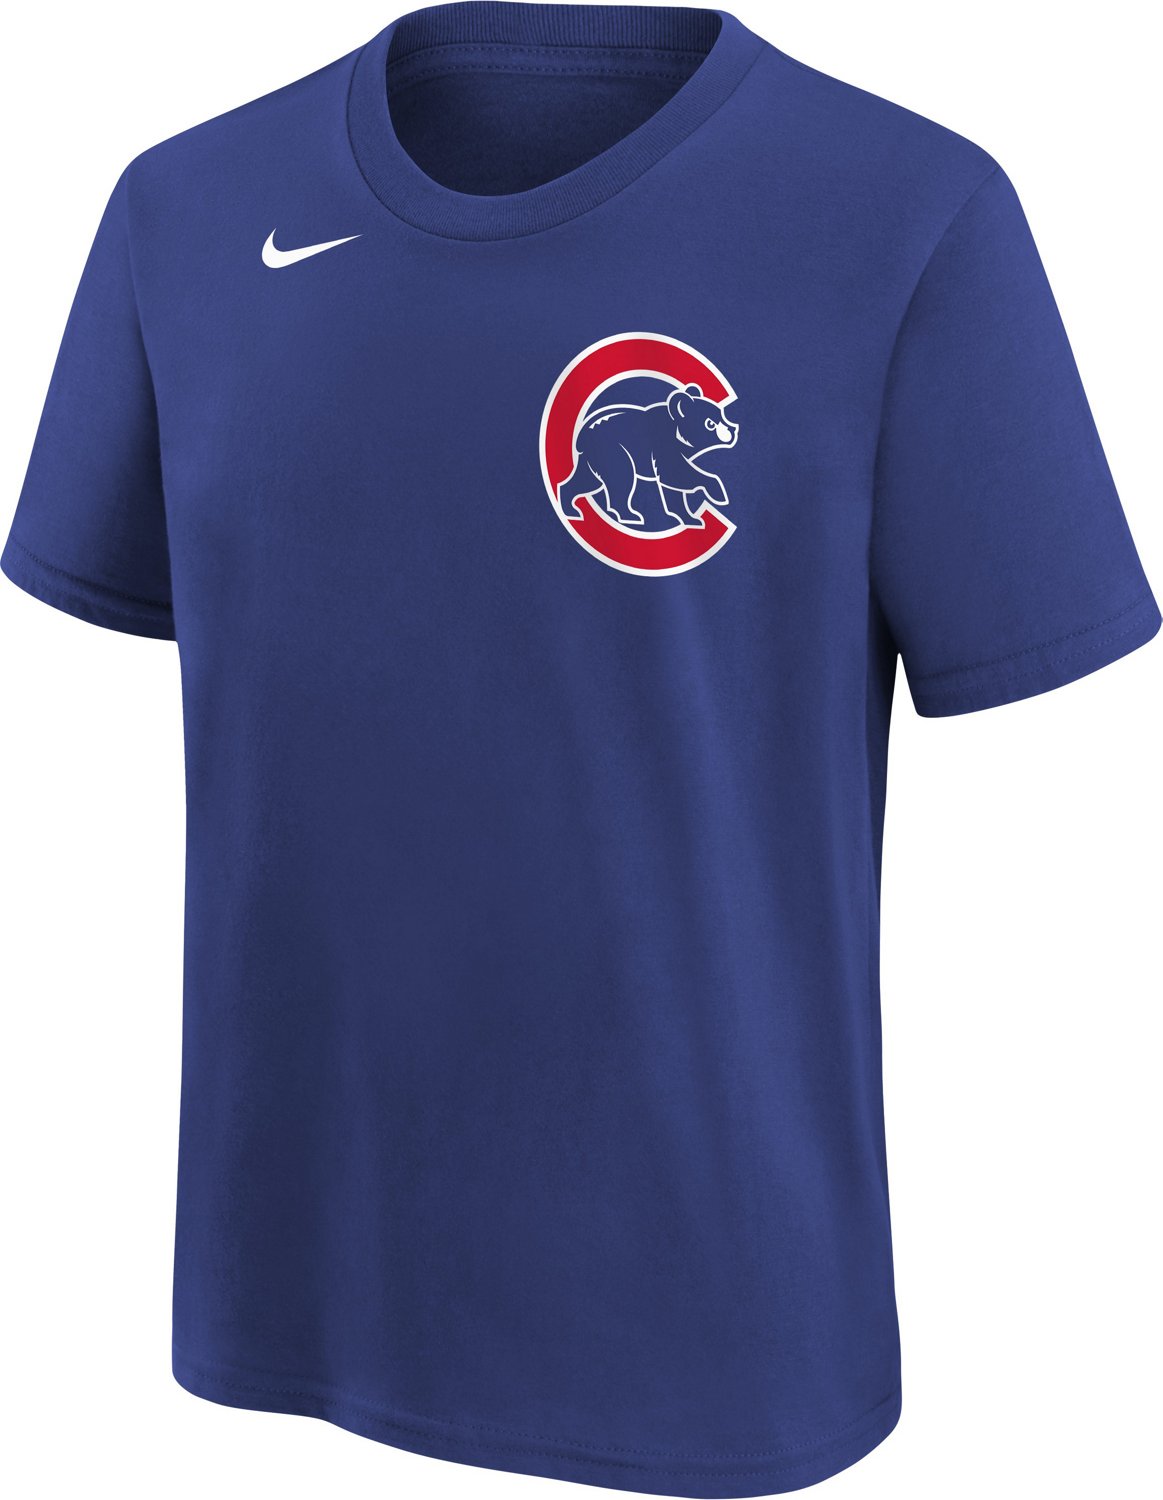 Nike Boys' Chicago Cubs Swanson Home Graphic T-shirt